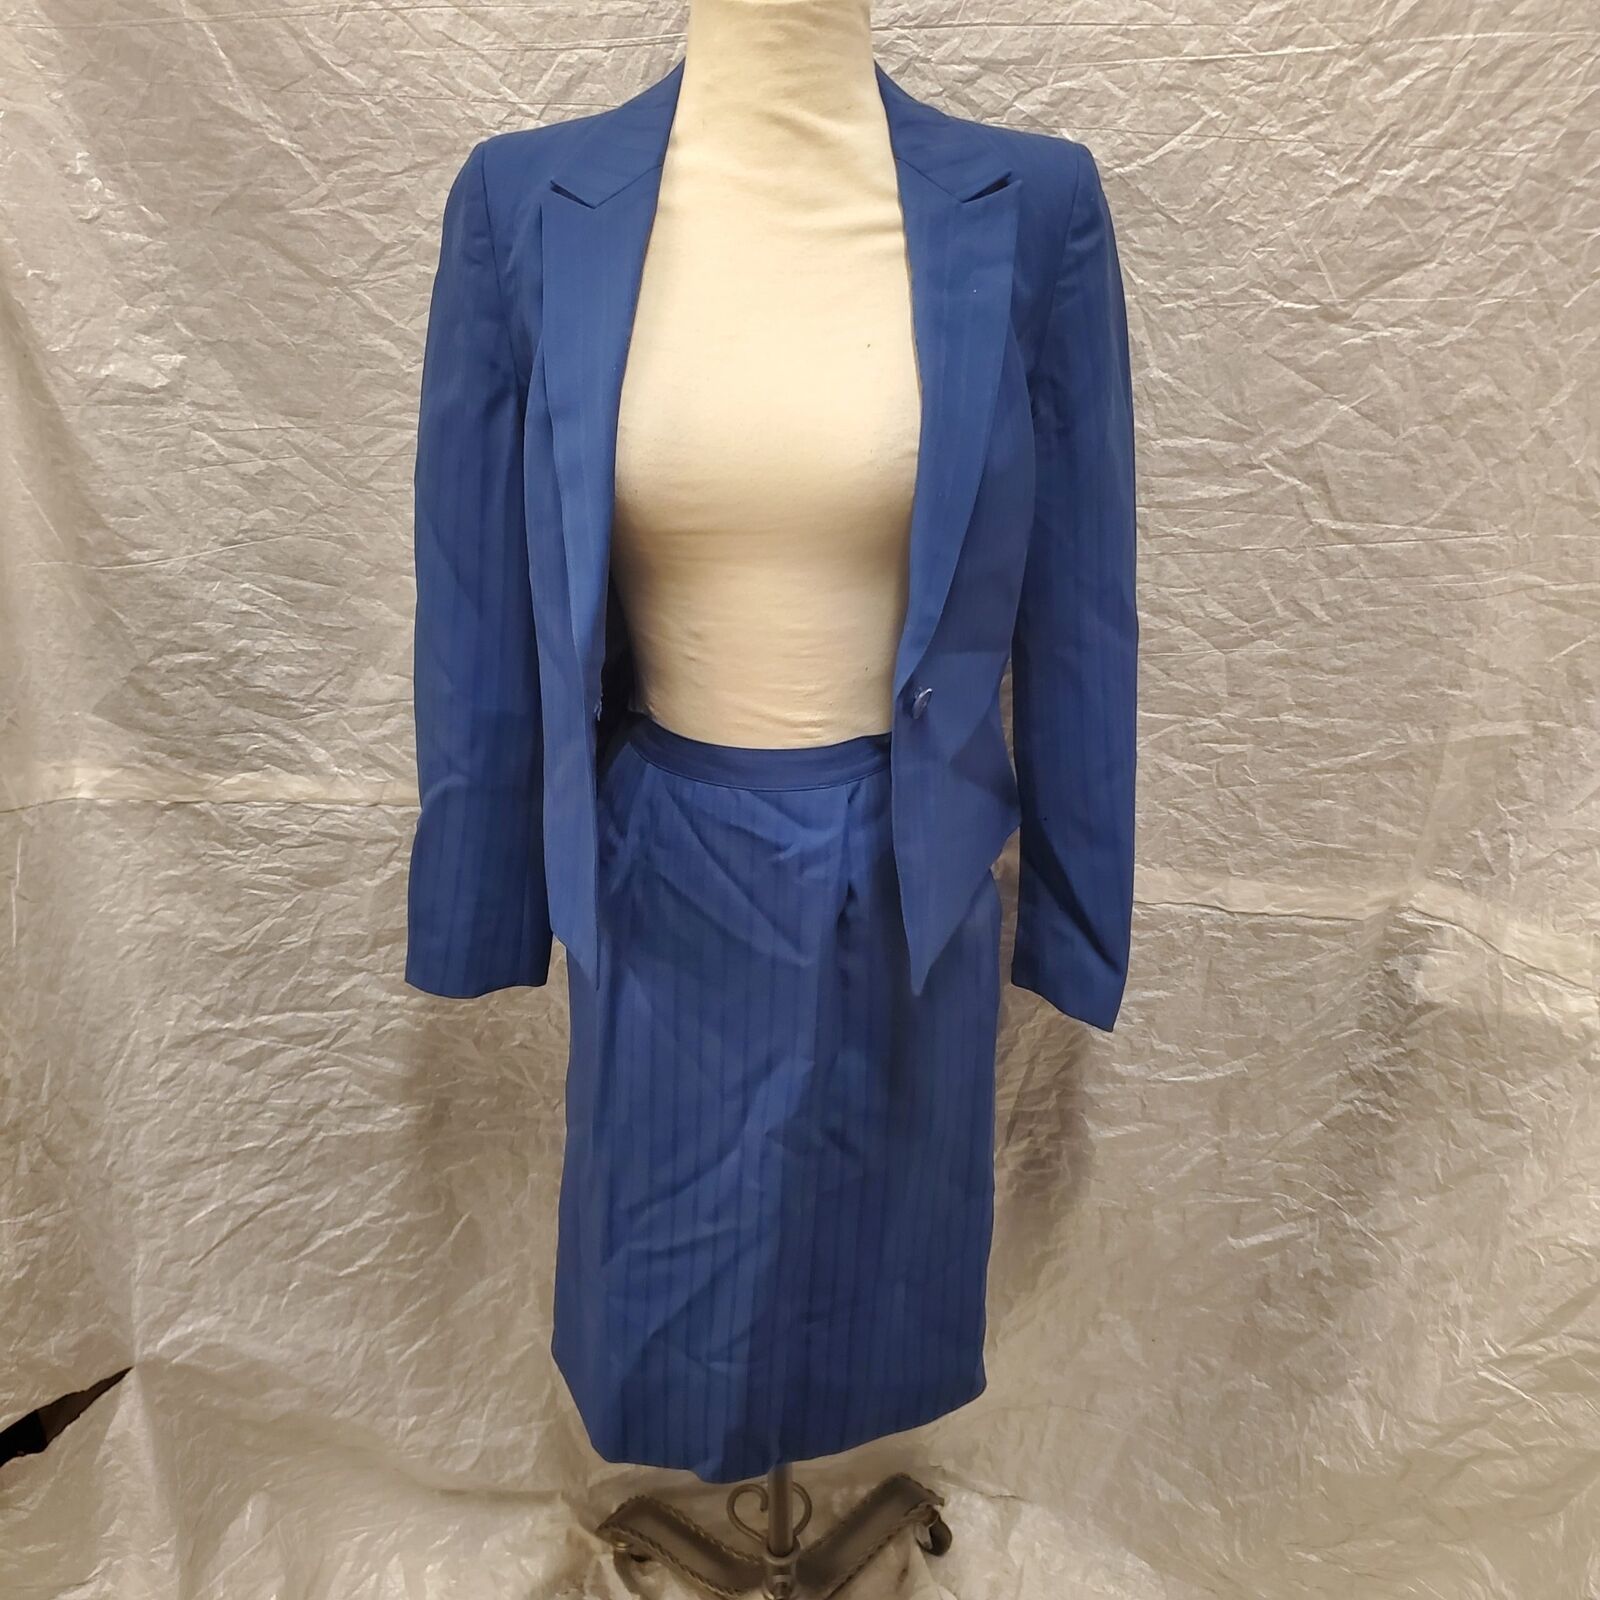 Primary image for Vintage Saks Fifth Avenue Women's Royal Blue Blazer and Skirt, Size 4